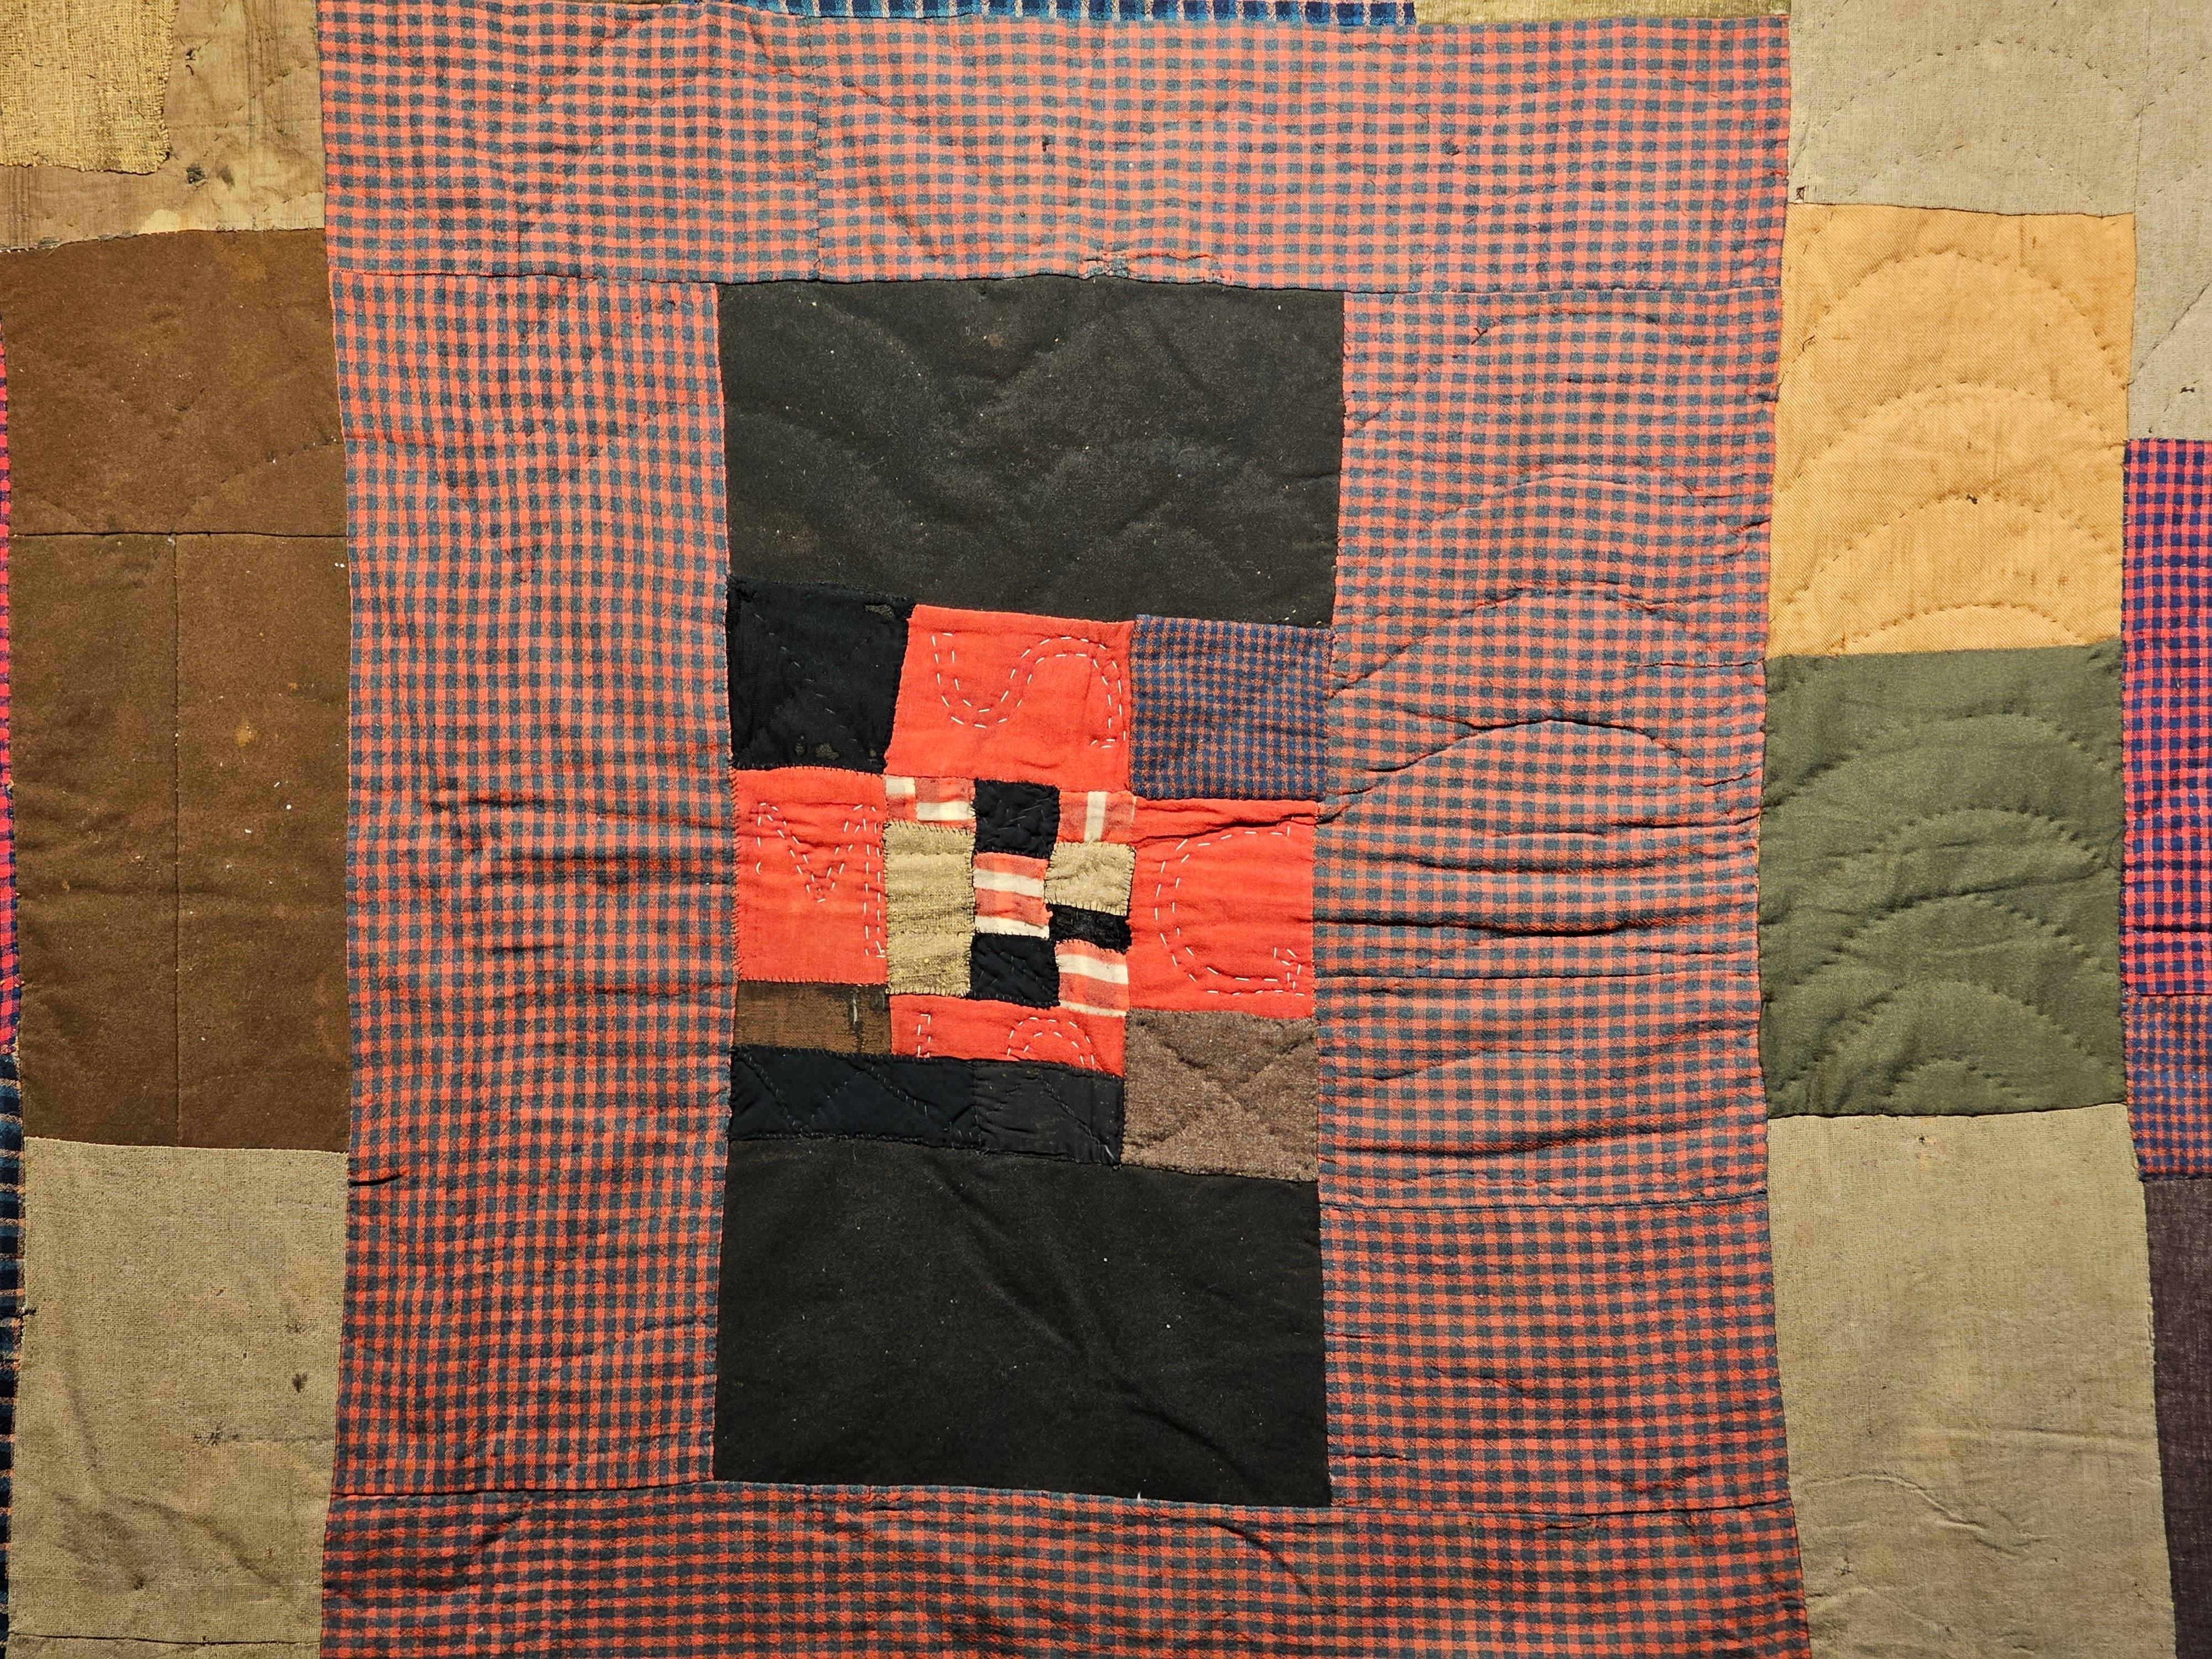 19th Century African American Southern Quilt Possibly of Gee’s Bend, Alabama 1